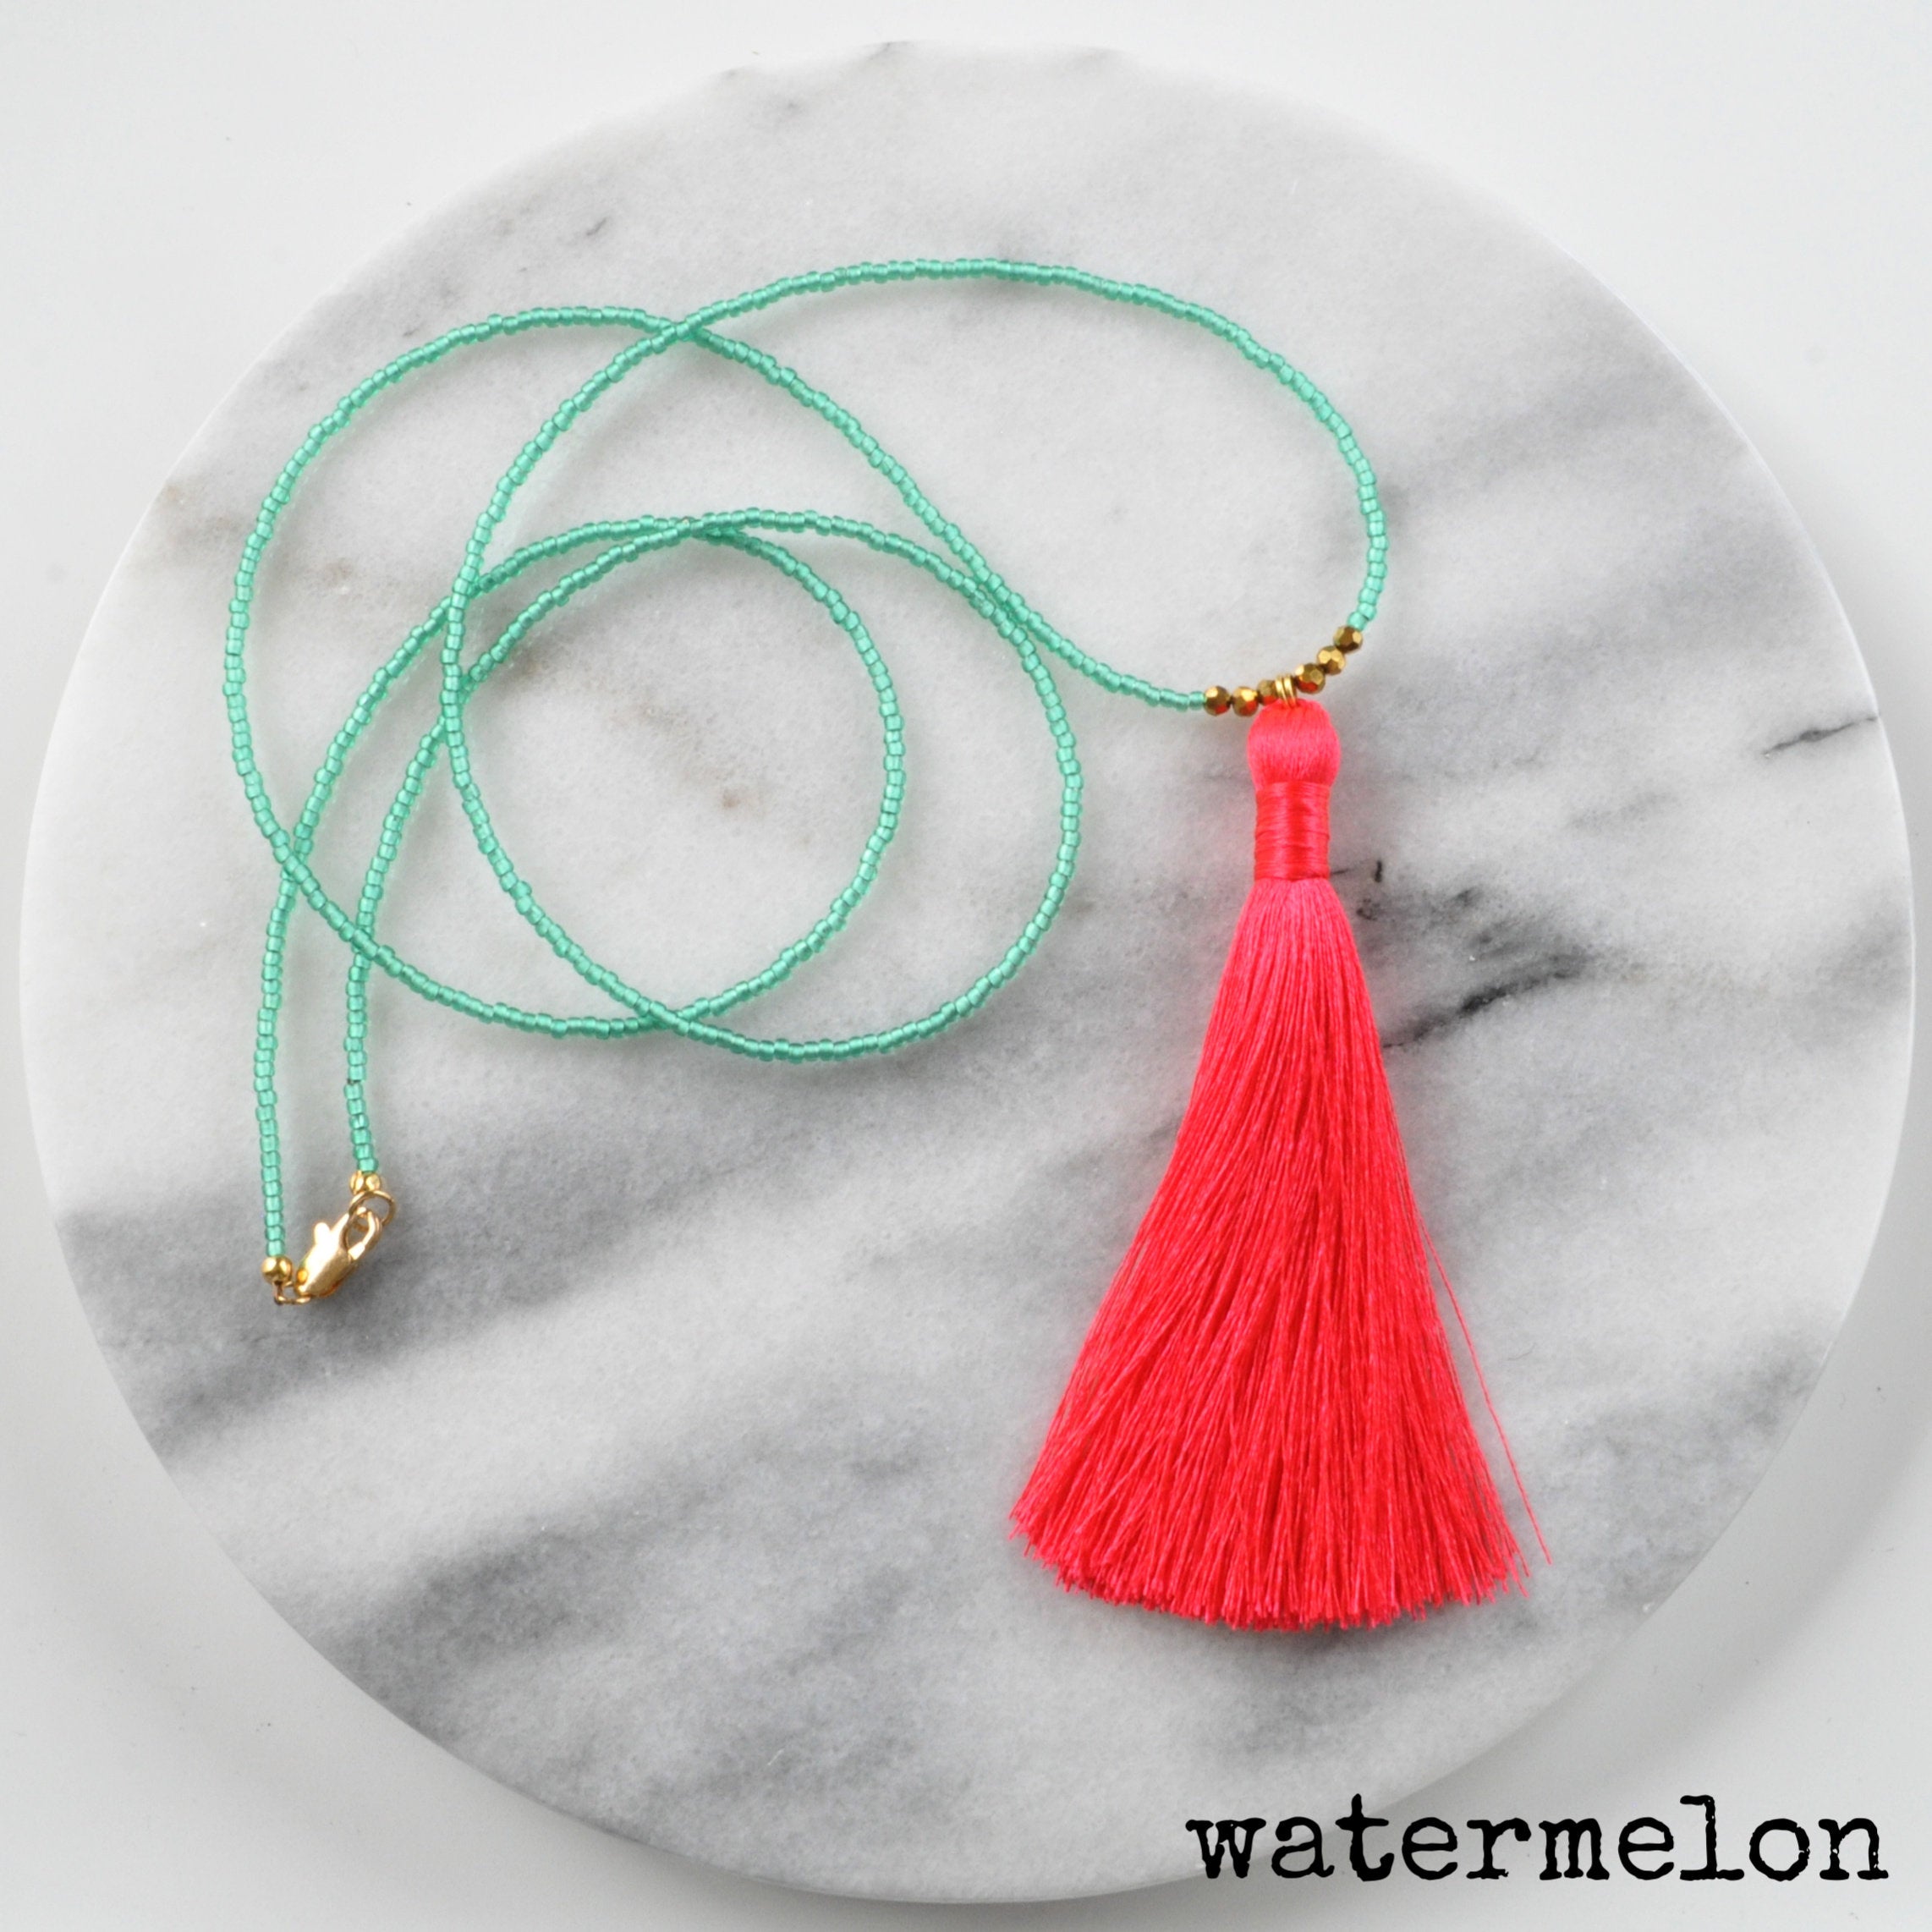 Libby & Smee Beaded Tassel Necklace in coral and green, still life labeled Watermelon